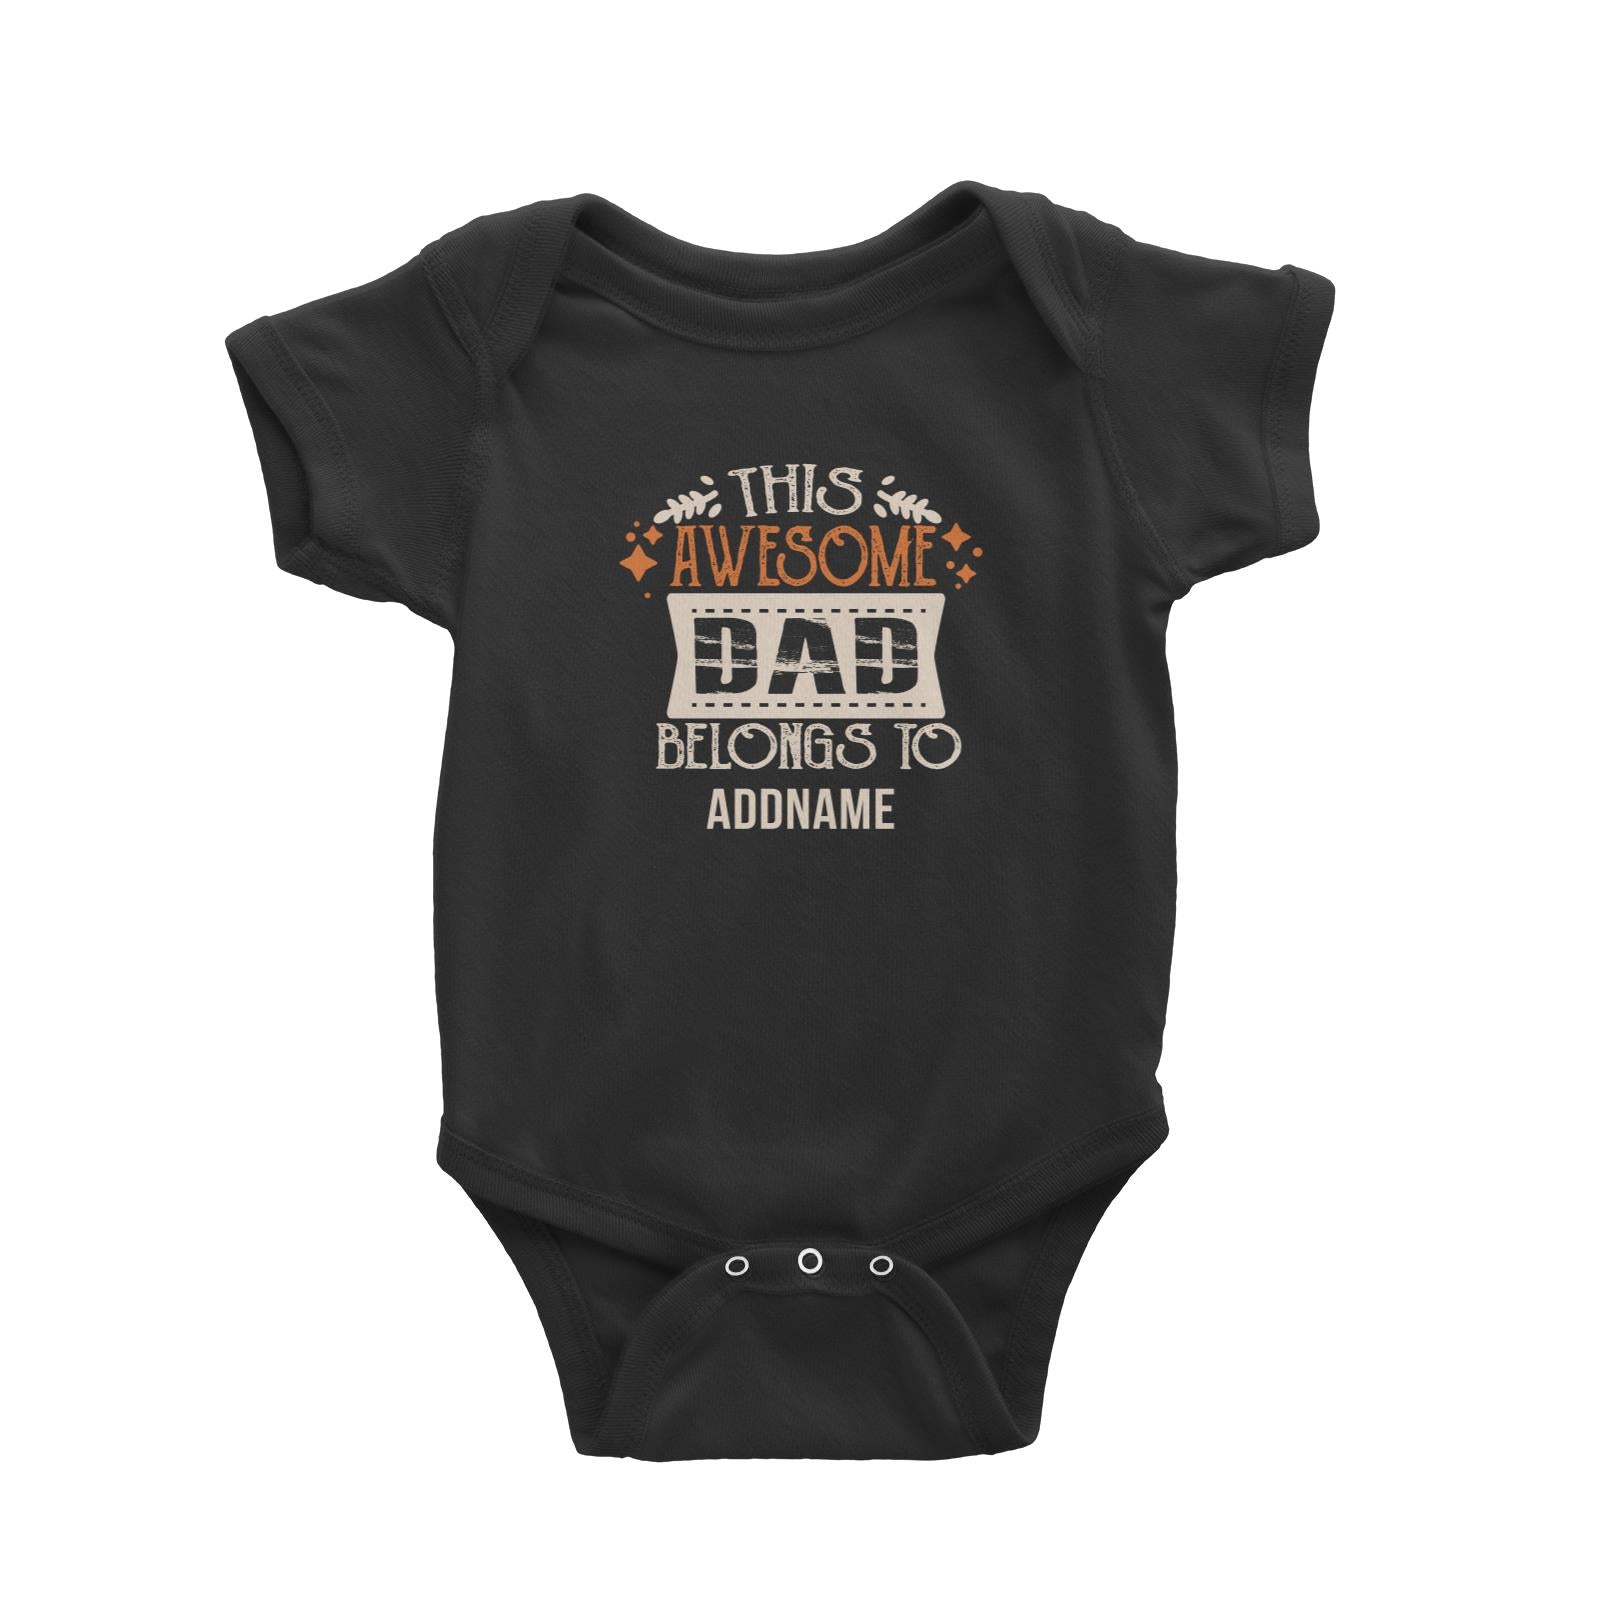 This Awesome Dad Belongs To Addname Baby Romper